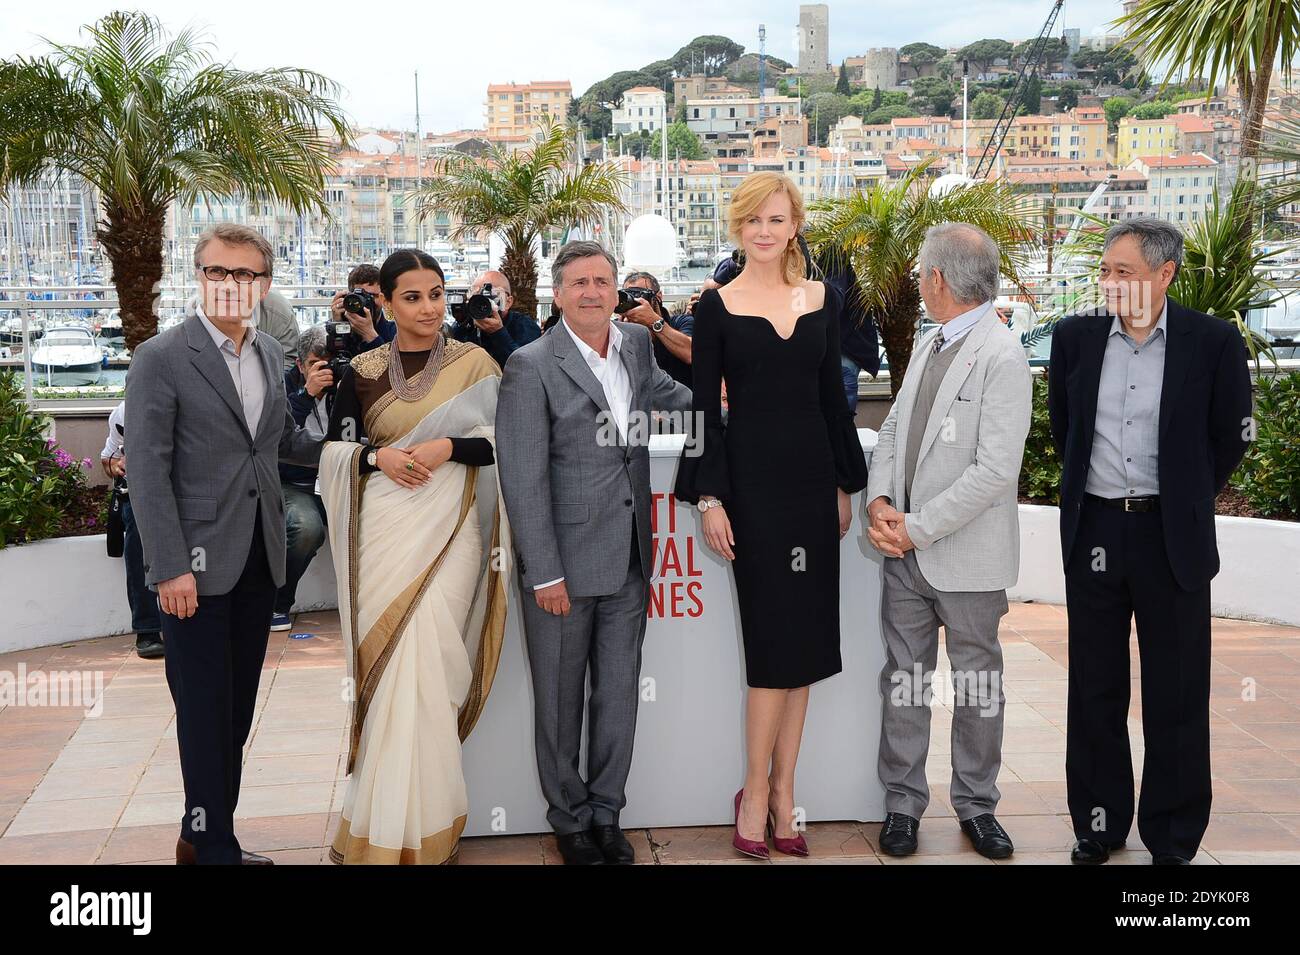 Christoph Waltz, Vidya Balan, Daniel Auteuil, Nicole Kidman, Director Steven Spielberg, Ang Lee posing at the Jury's photocall held at the Palais Des Festivals as part of the 66th Cannes film festival, in Cannes, southern France, on May 15, 2013. Photo by Nicolas Briquet/ABACAPRESS.COM Stock Photo